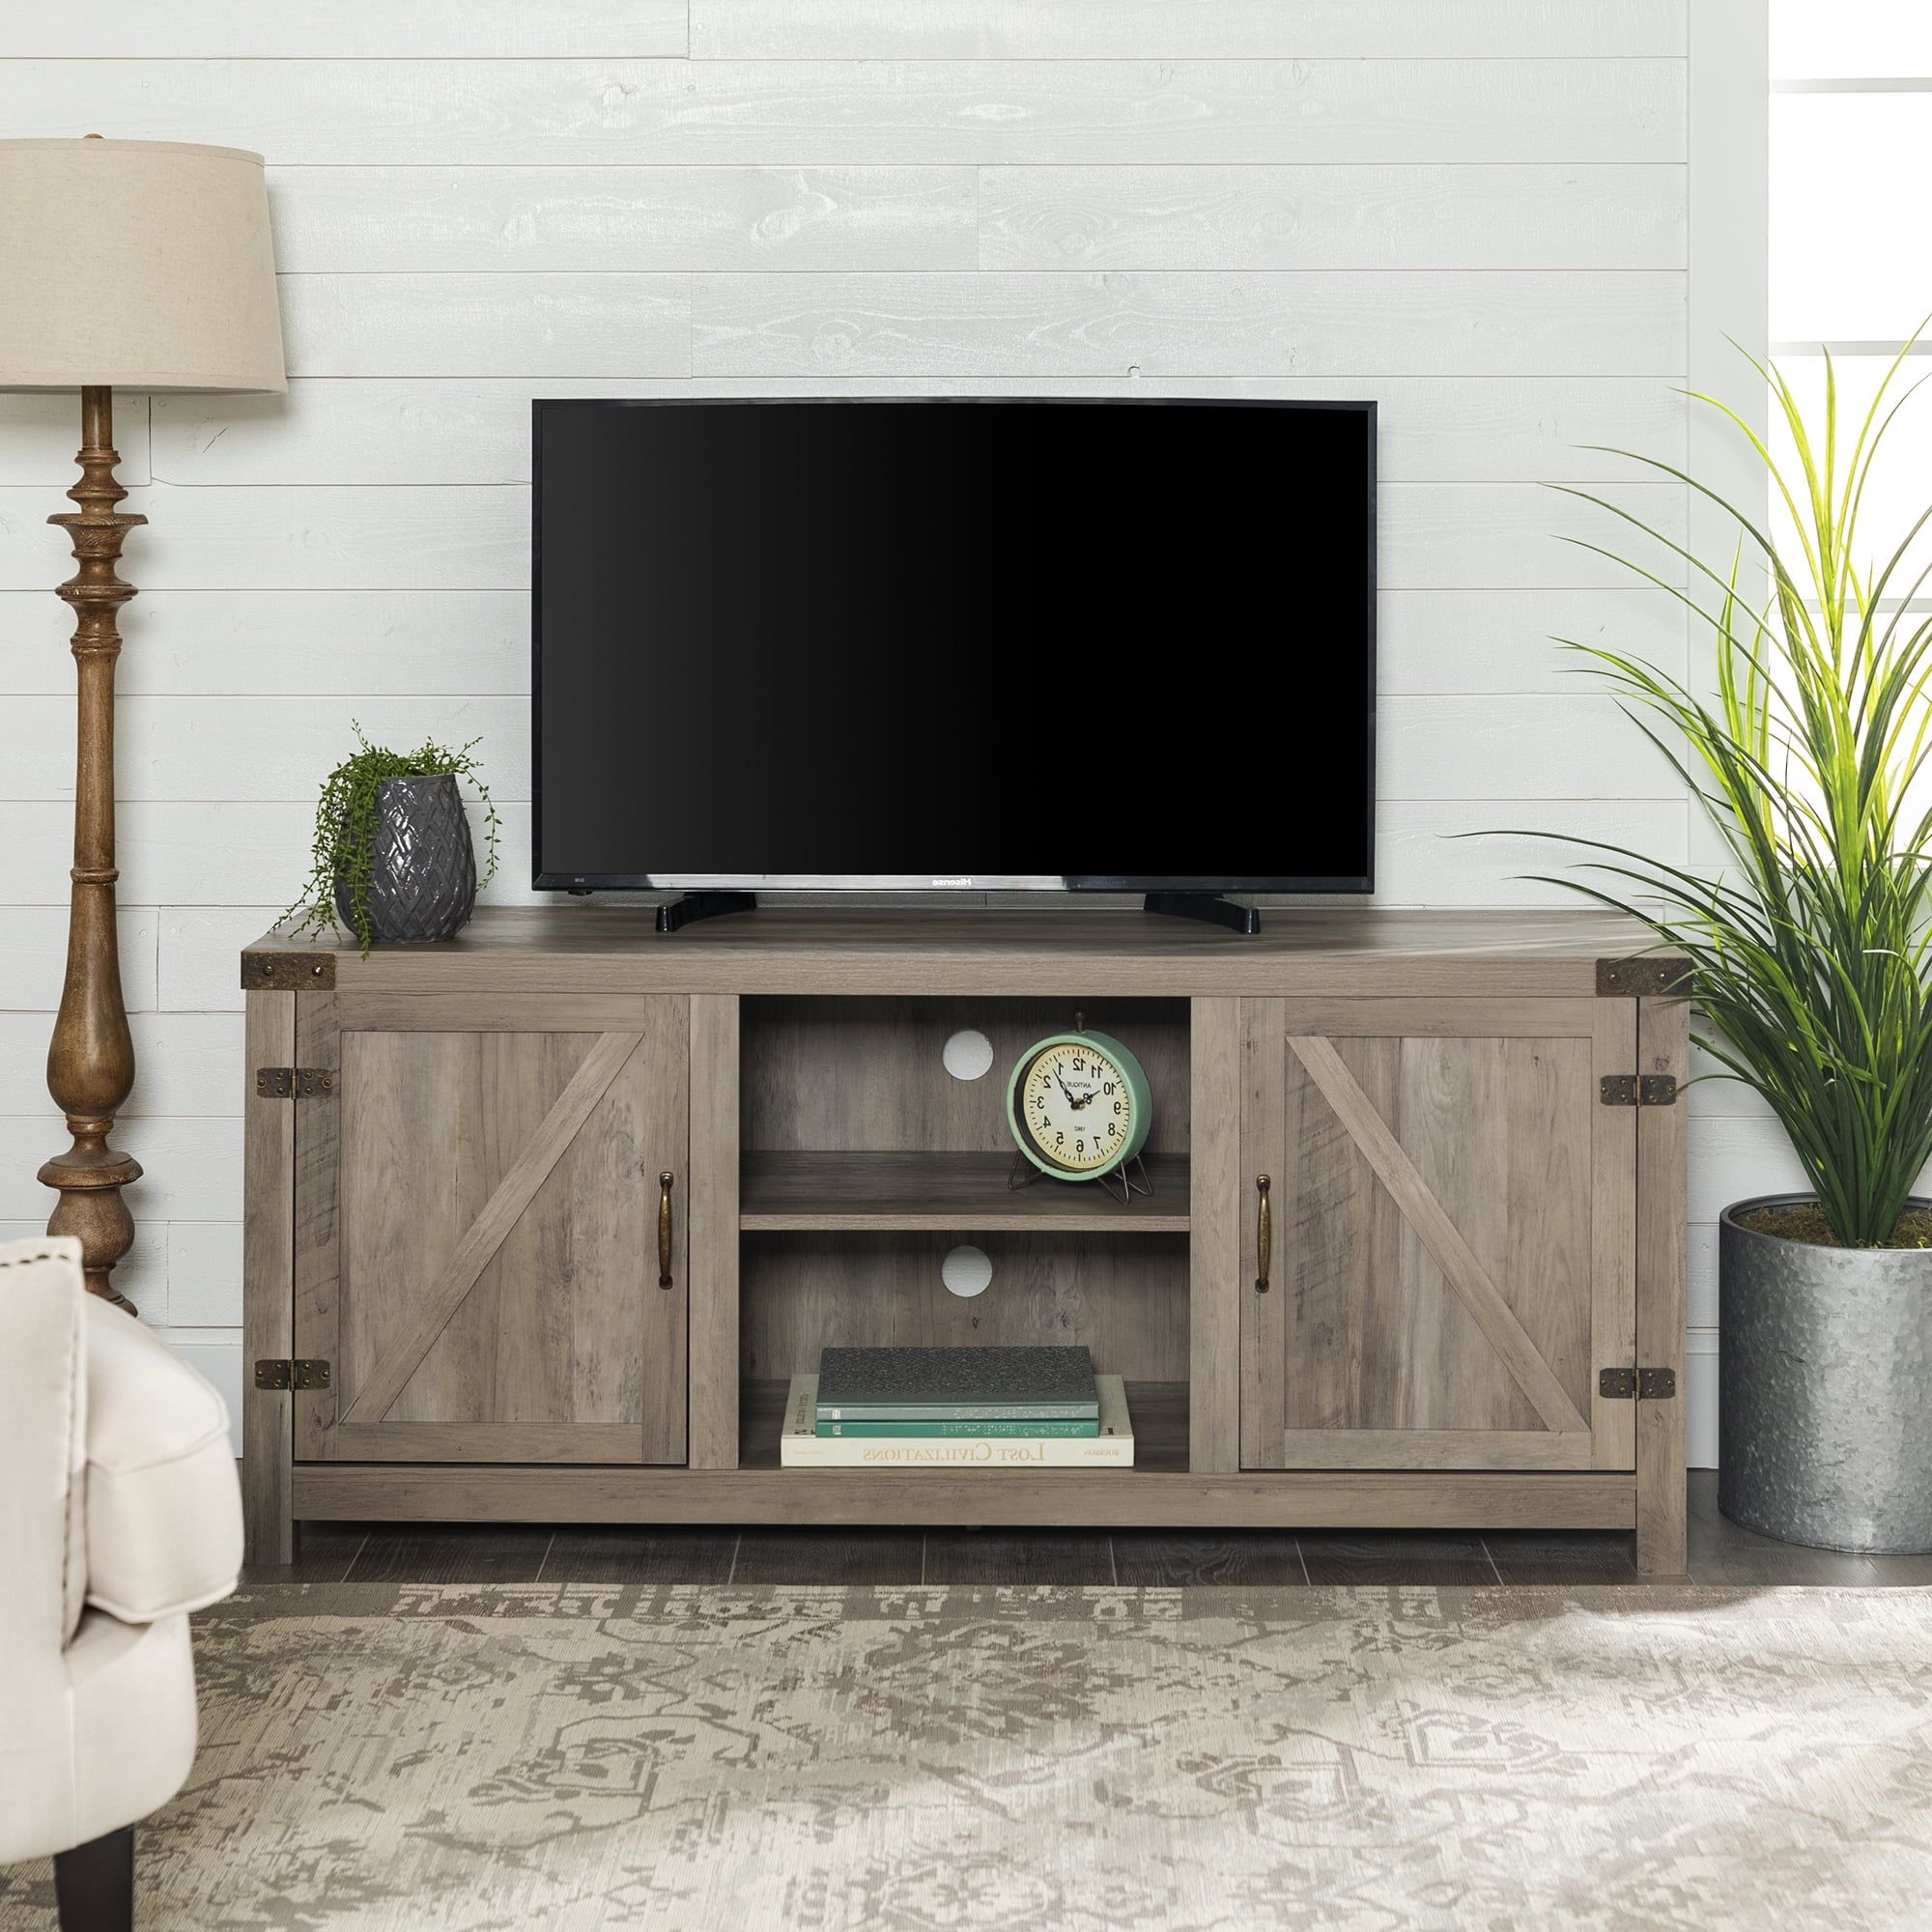 Most Current Manor Park Farmhouse Barn Door Tv Stand For Tvs Up To 65", Grey Wash Inside Farmhouse Tv Stands (View 7 of 15)